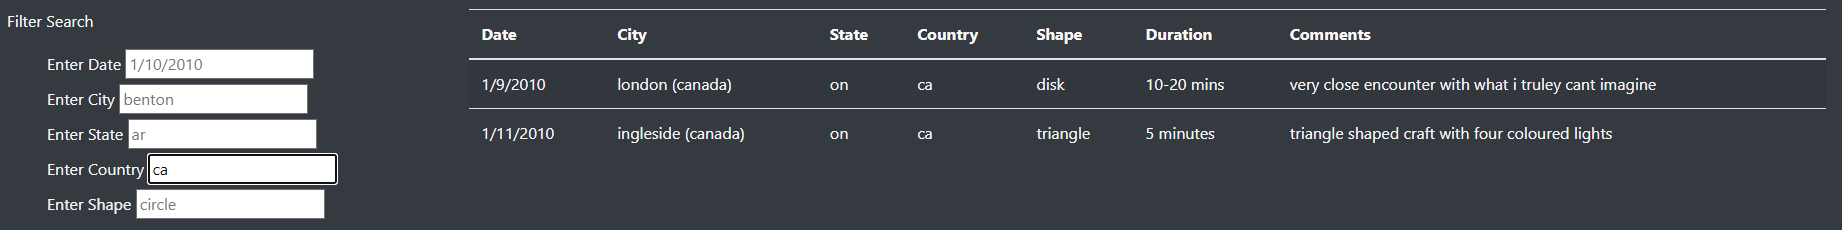 Filter Search Table By Country